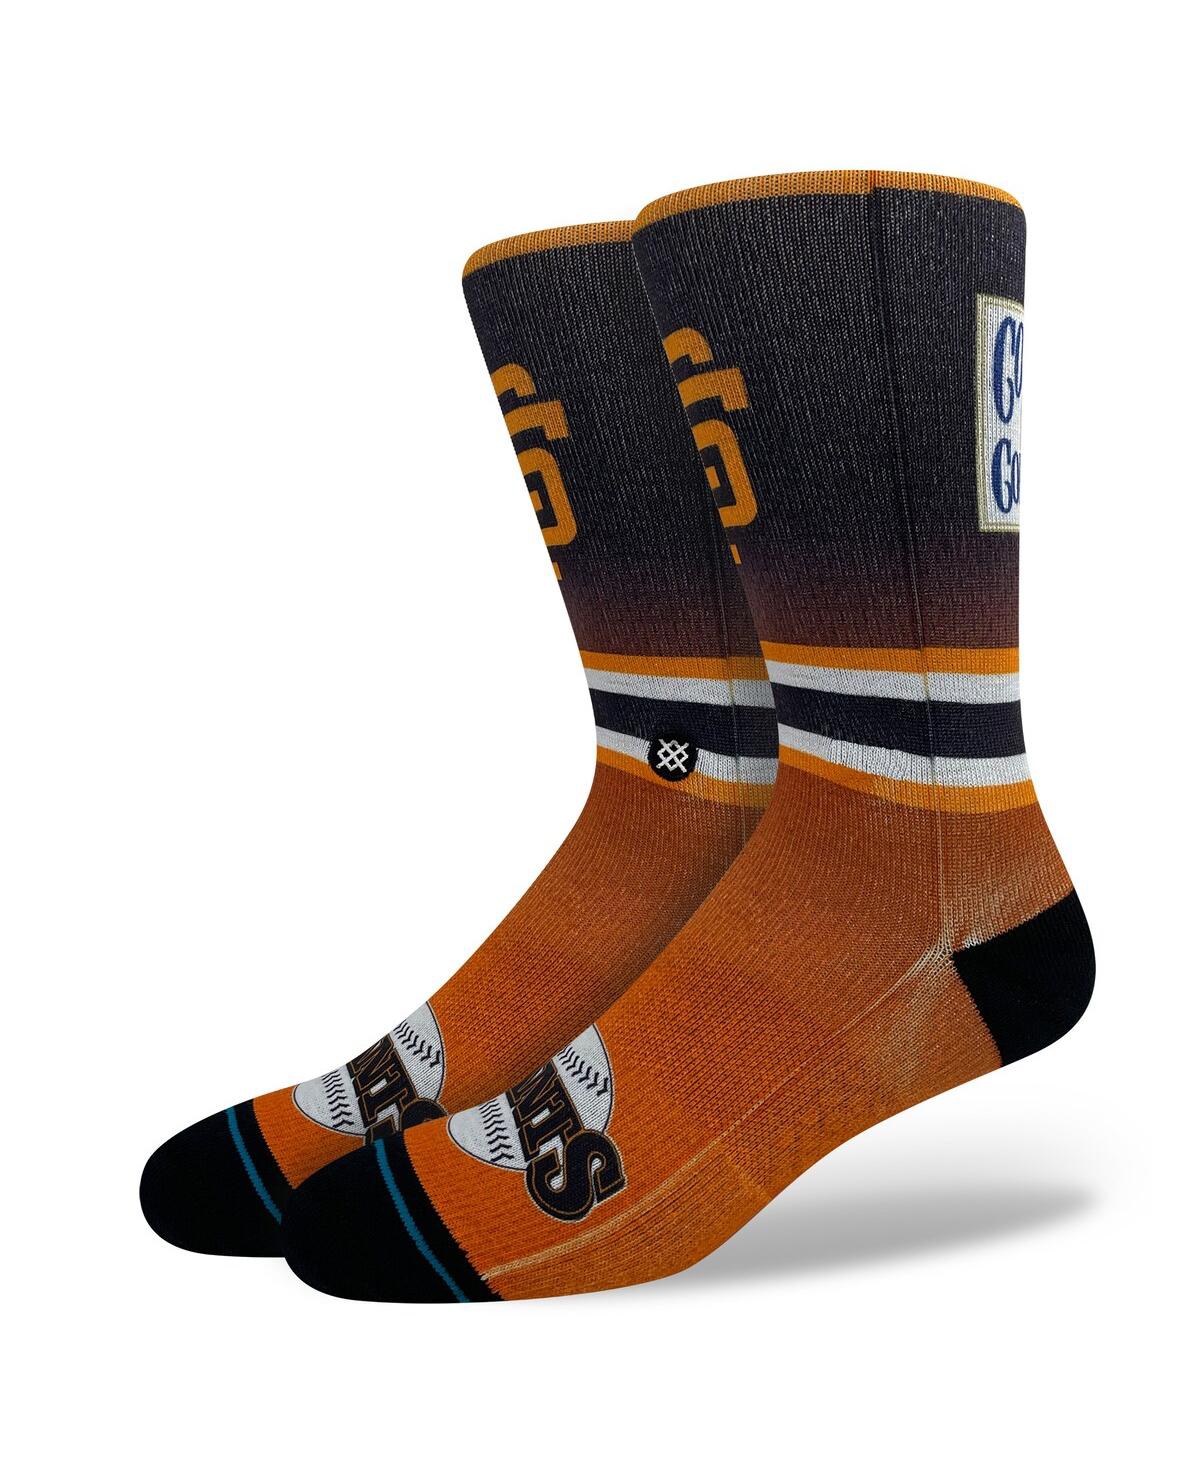 Men's Stance San Francisco Giants Cooperstown Collection Crew Socks - Multi